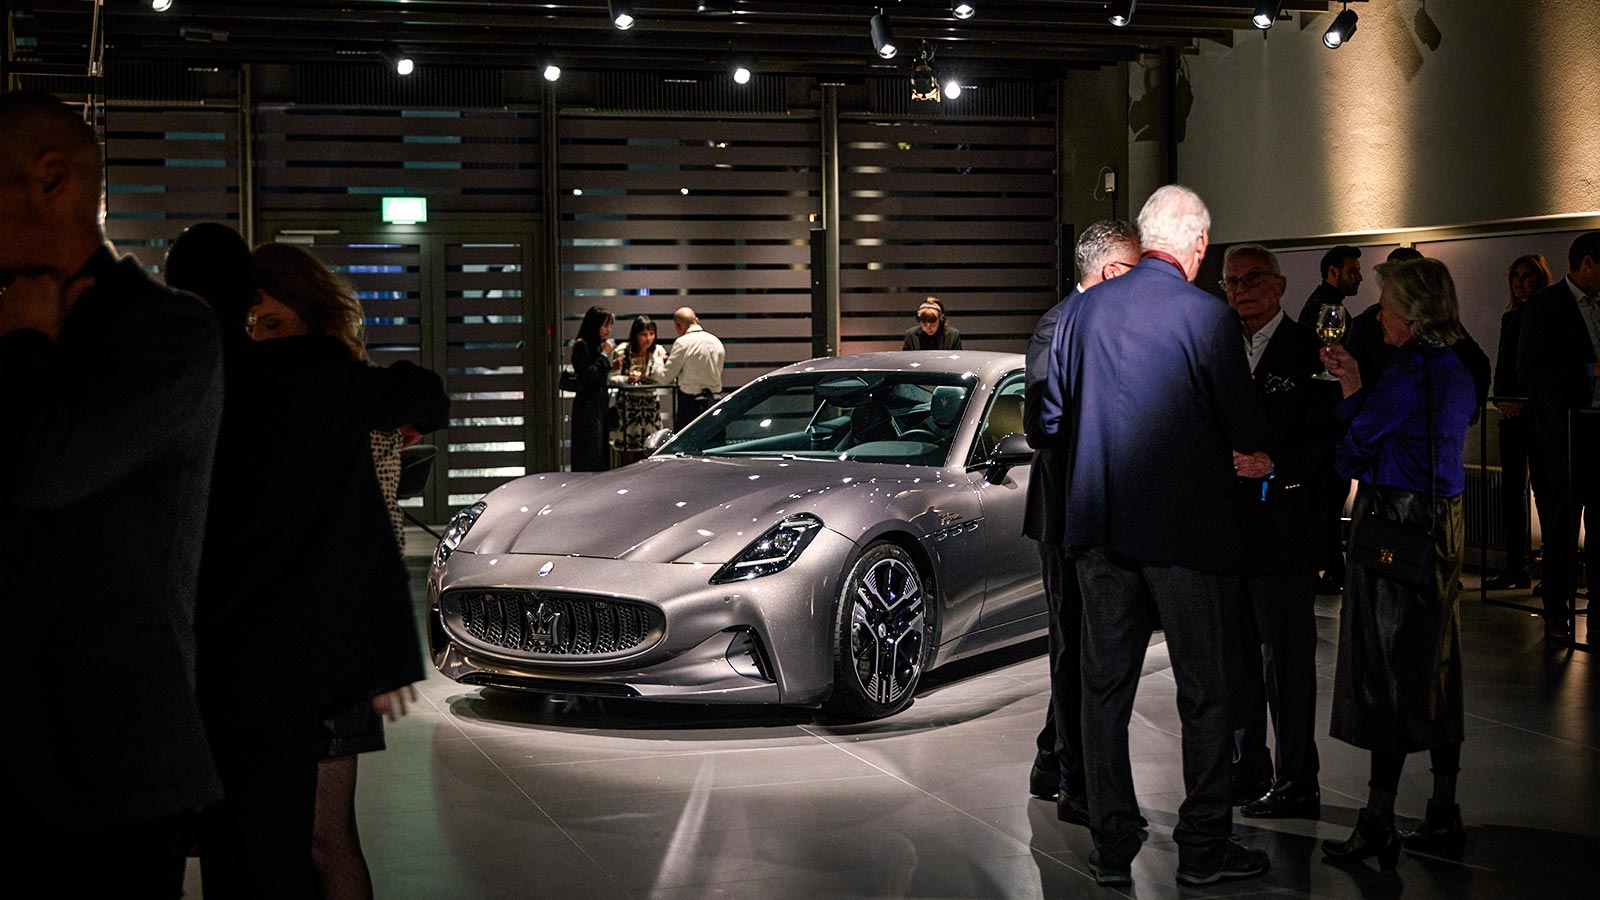 Opening of the Maserati showroom in Zurich Teaser